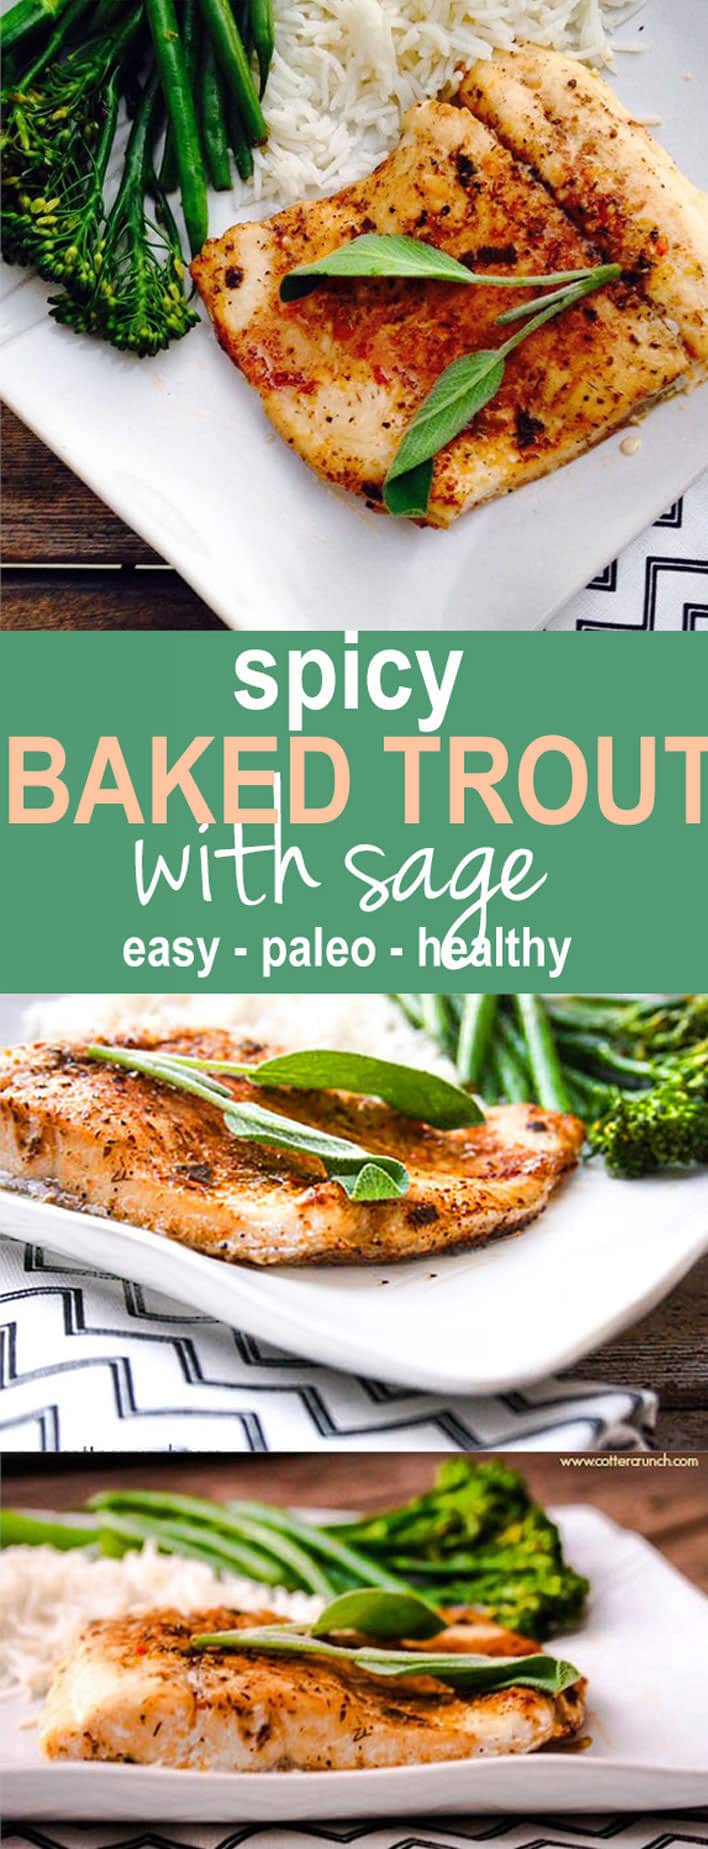 Spicy Baked Southwest Trout with Herbs! This baked trout is easy to make, paleo, and great use of herbs (like sage) and other spices! @cottercrunch